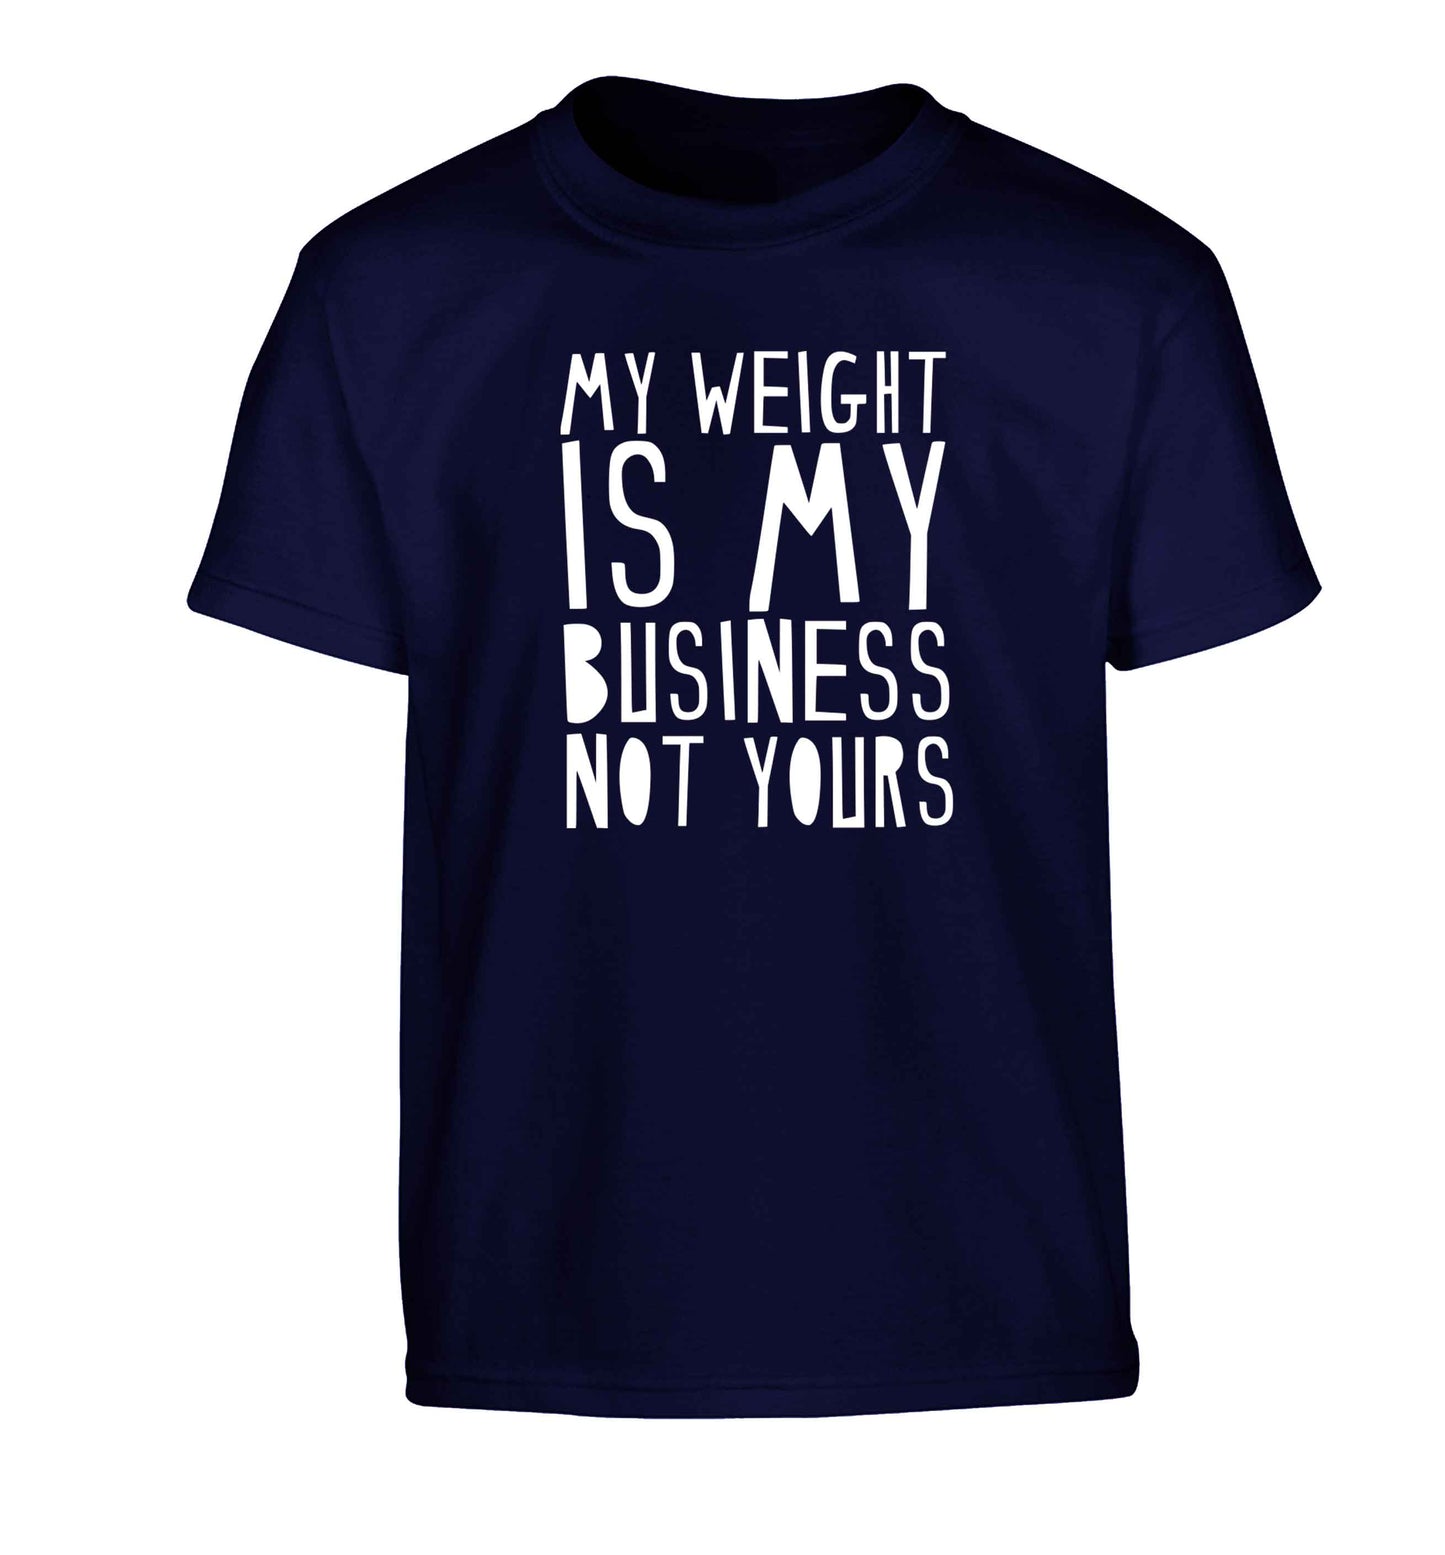 My weight is my business not yours Children's navy Tshirt 12-13 Years